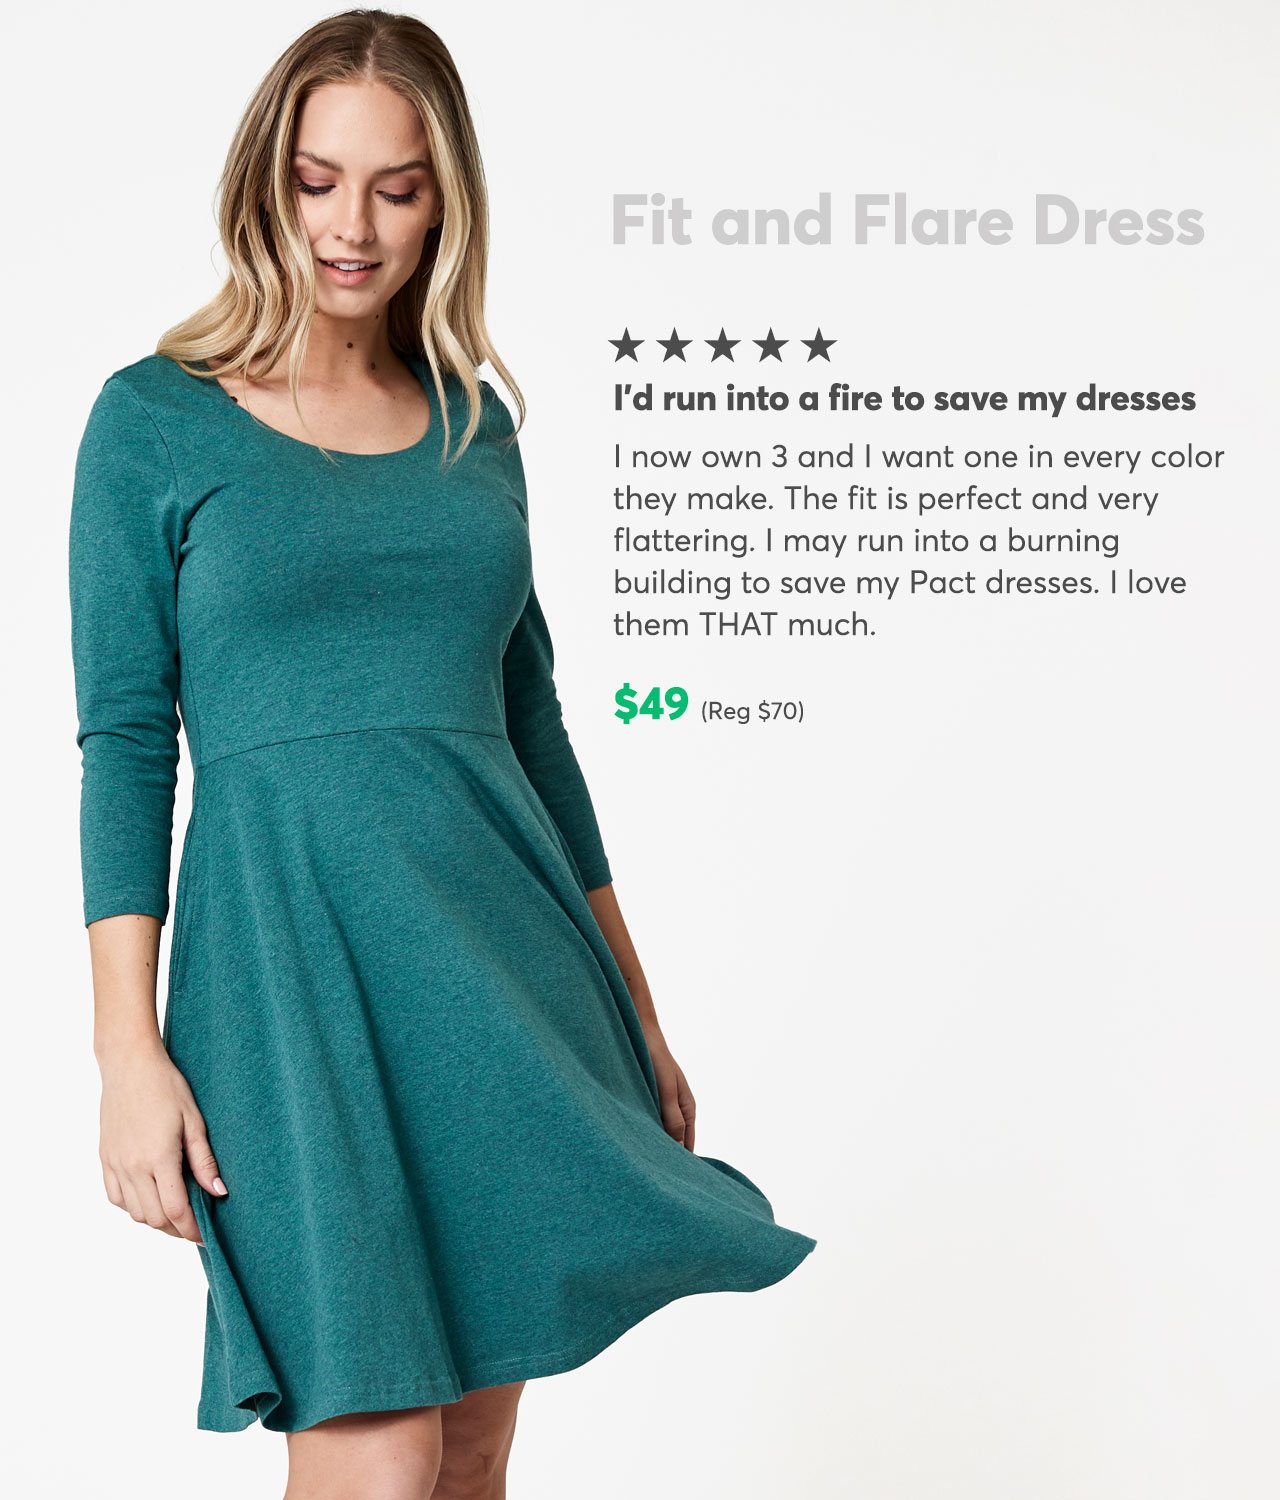 Three-Quarter Sleeve Fit and Flare Dress $49